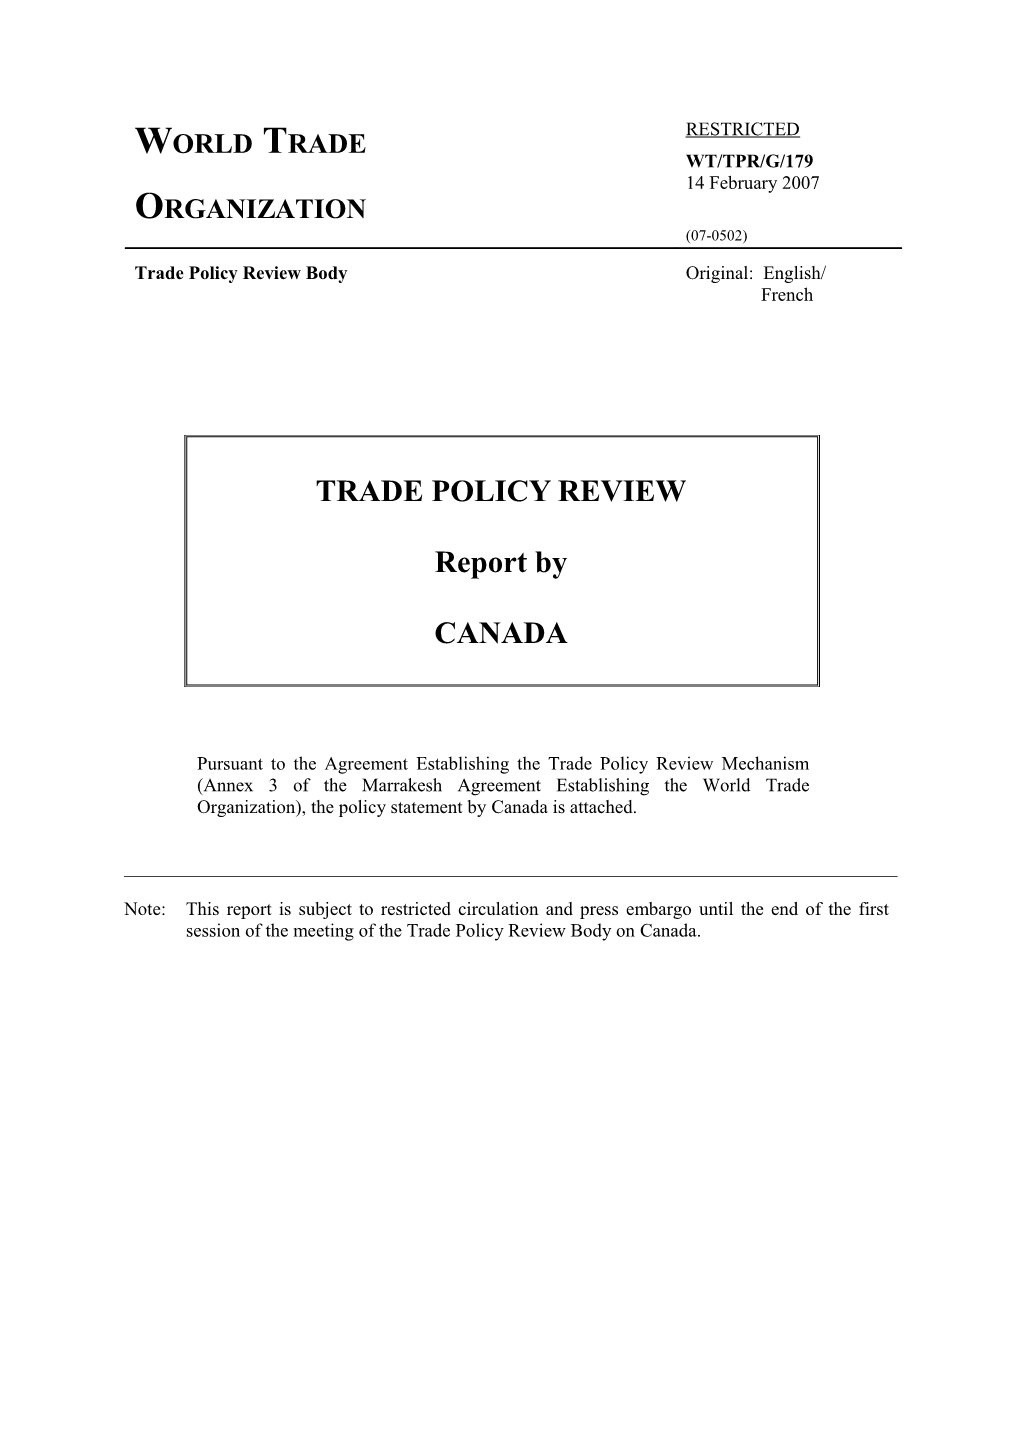 I.Trade and Economic Policy Environment5